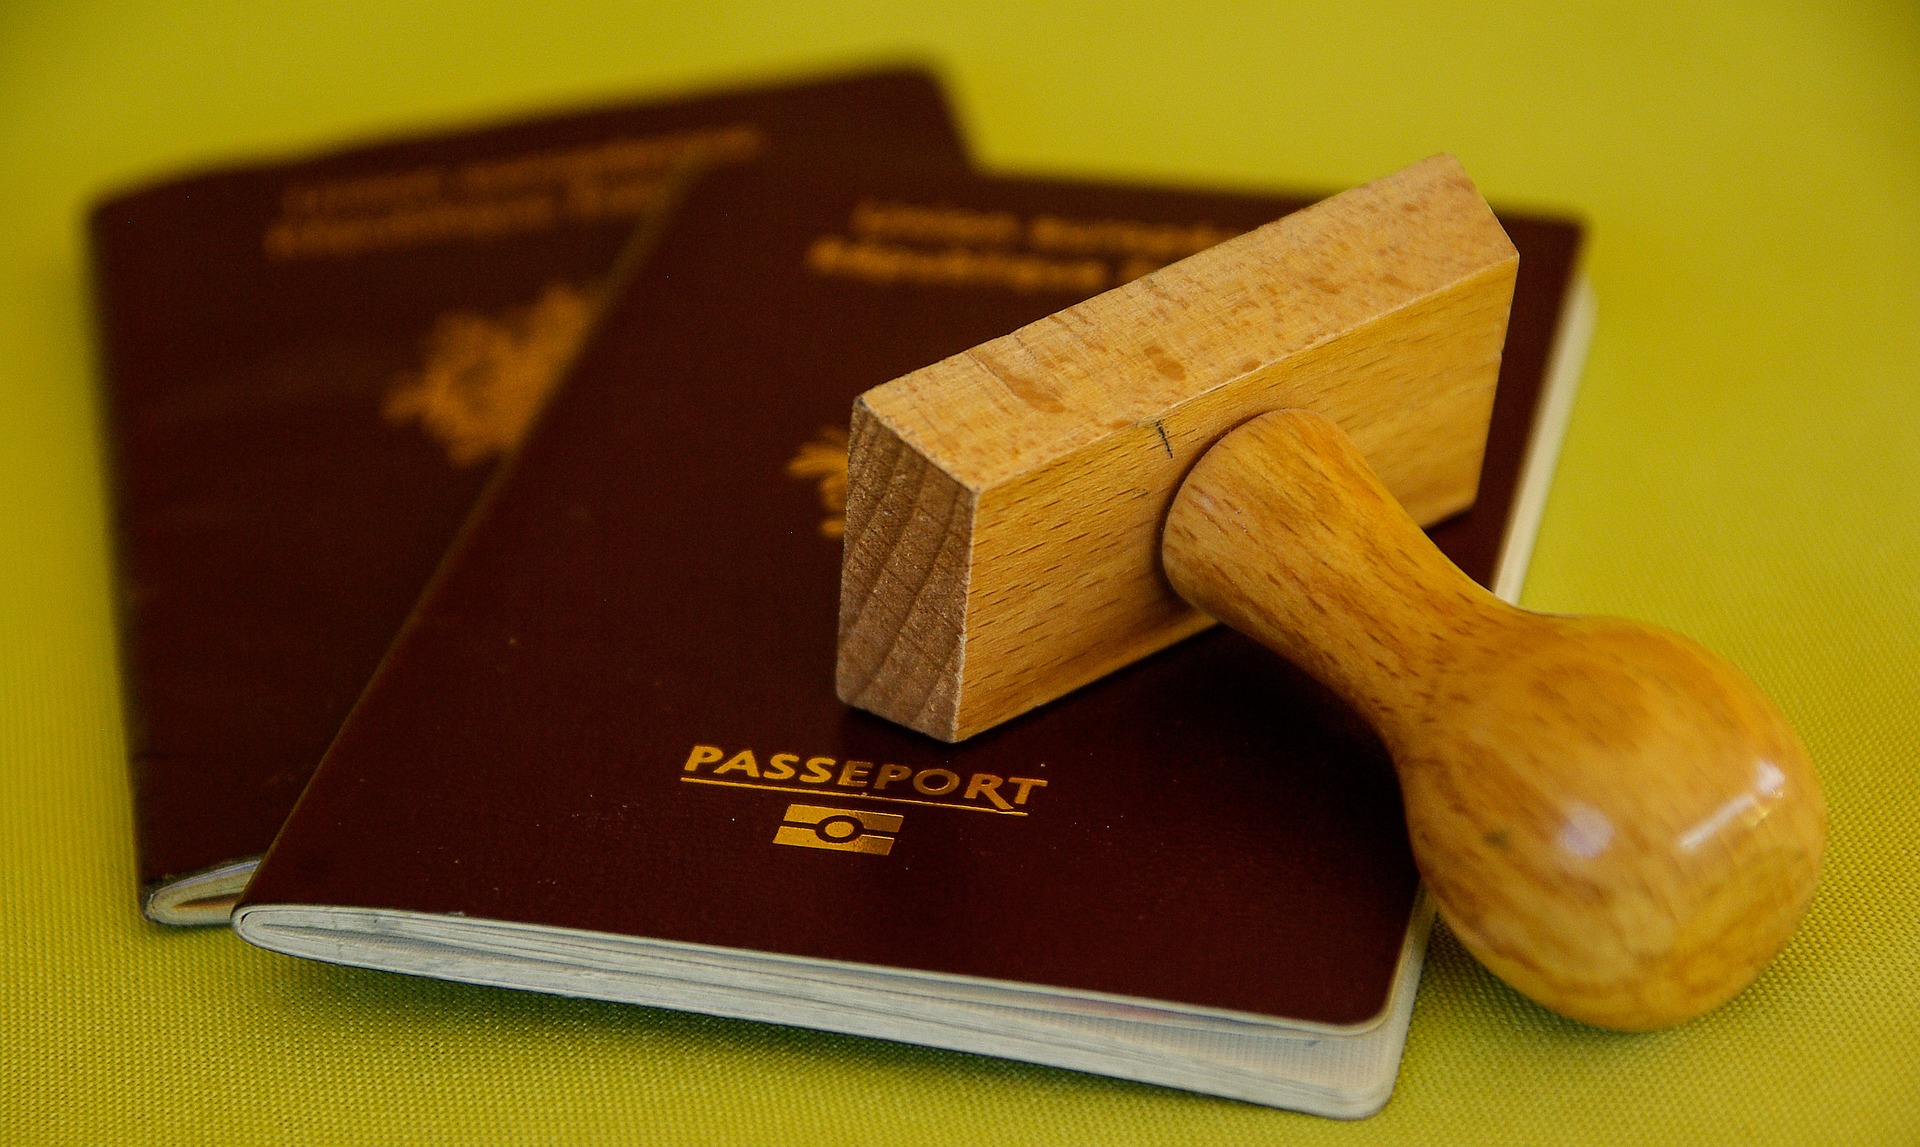 Two Passports; our Conveyancing Solicitors in Lancaster discuss ID requirements when selling or buying property.